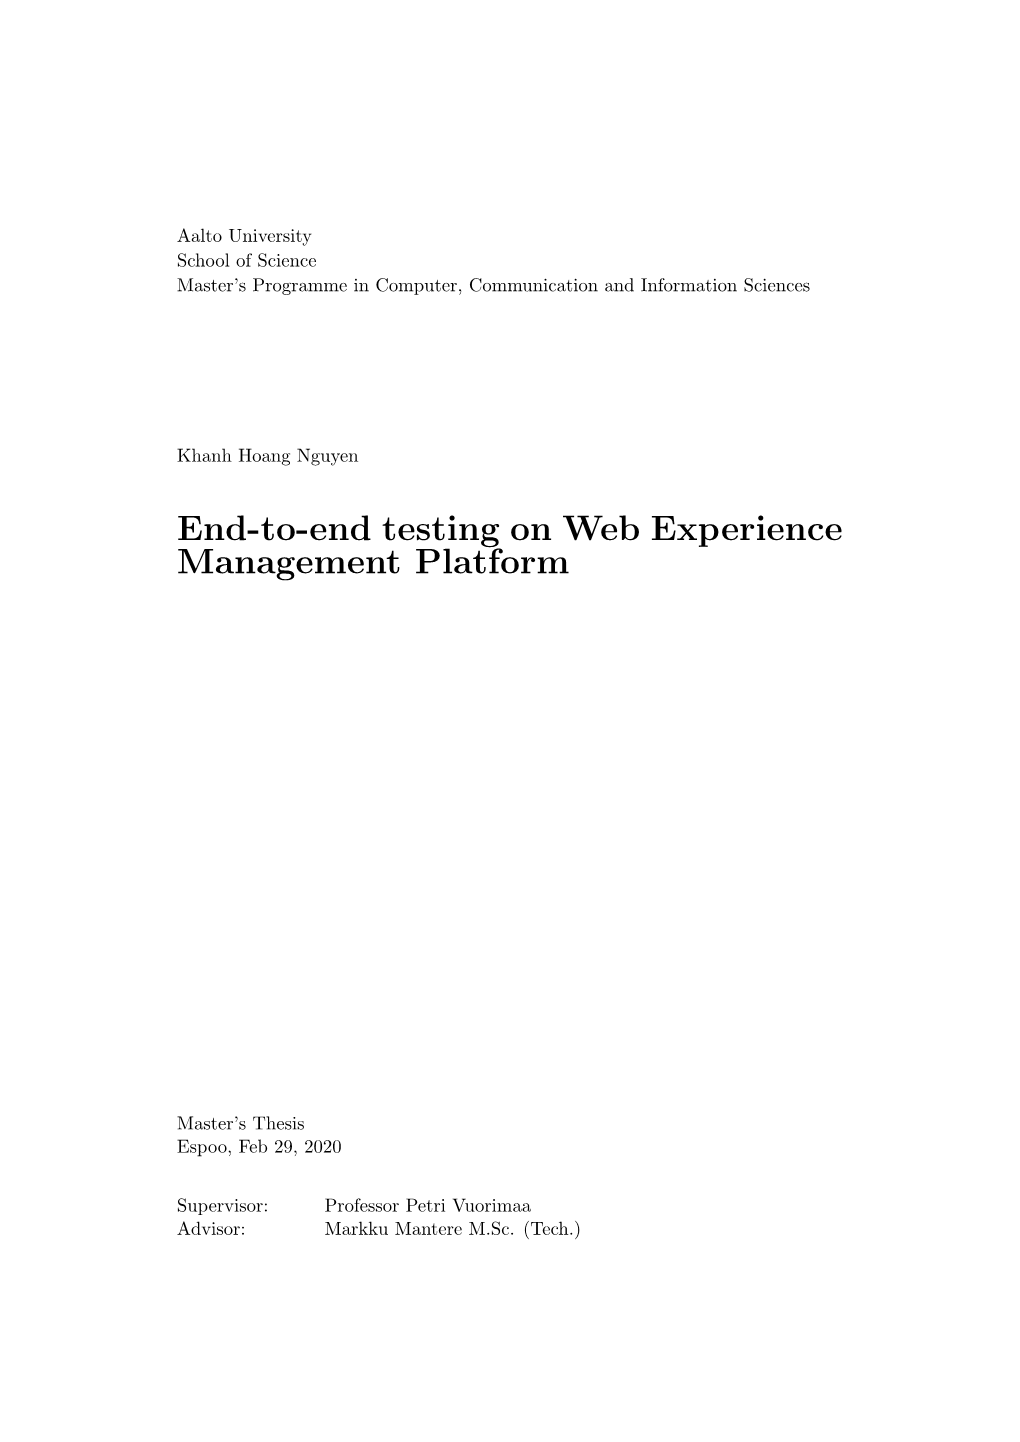 End-To-End Testing on Web Experience Management Platform